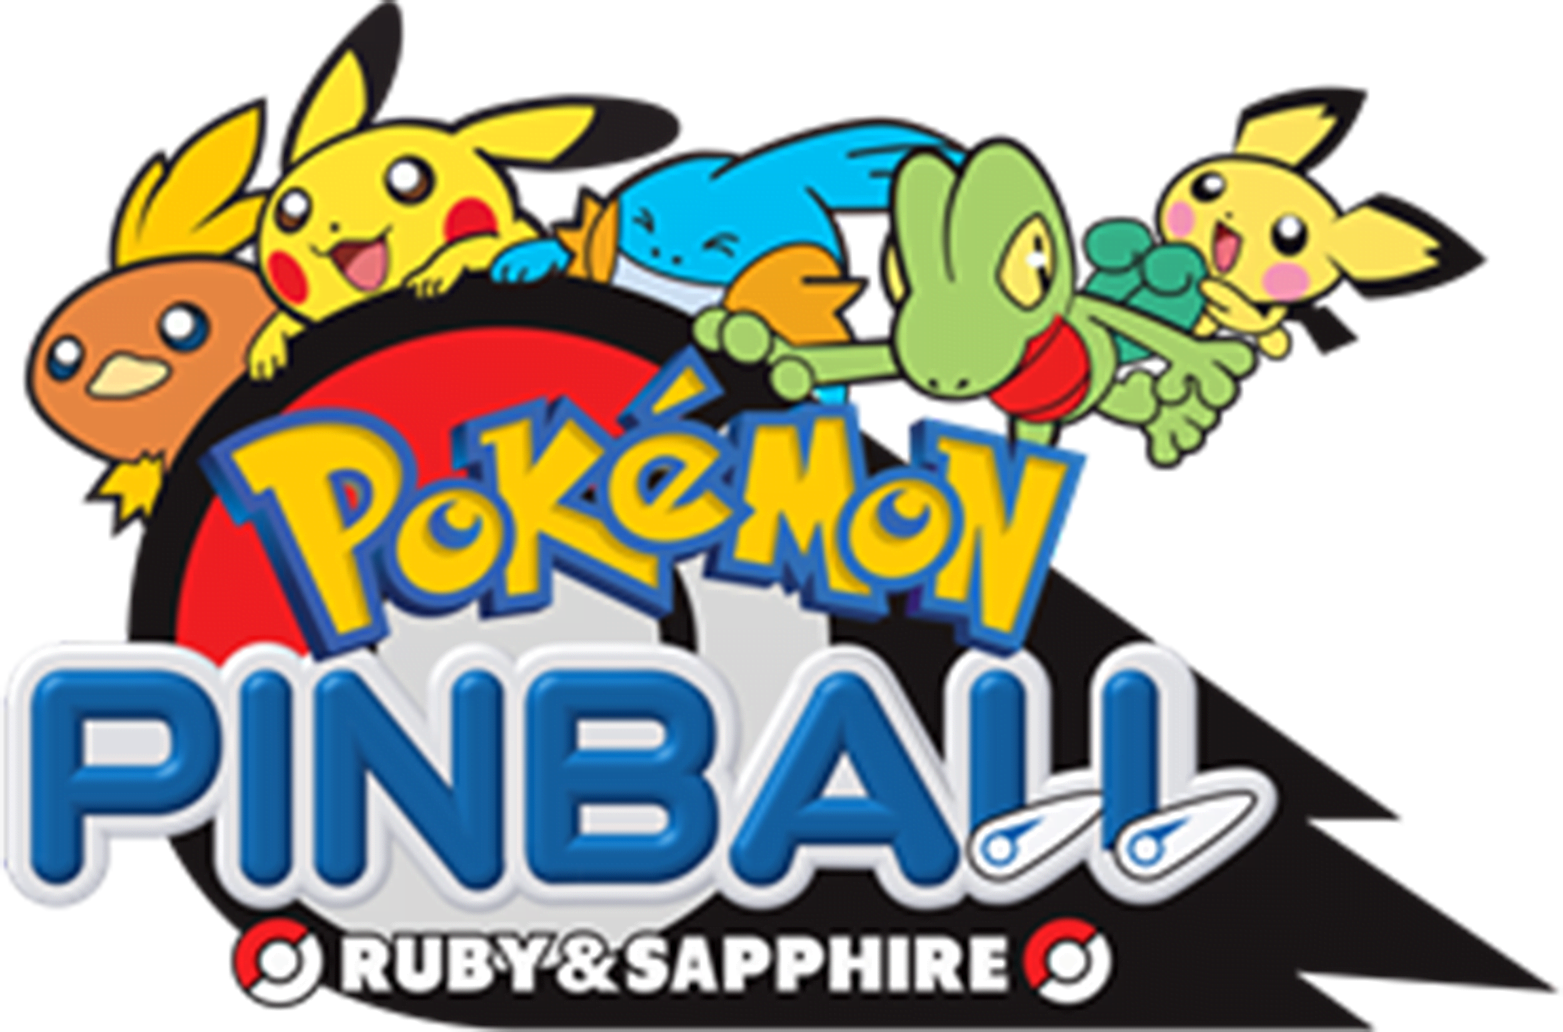 A Pokémon Pinball title was planned for the DS